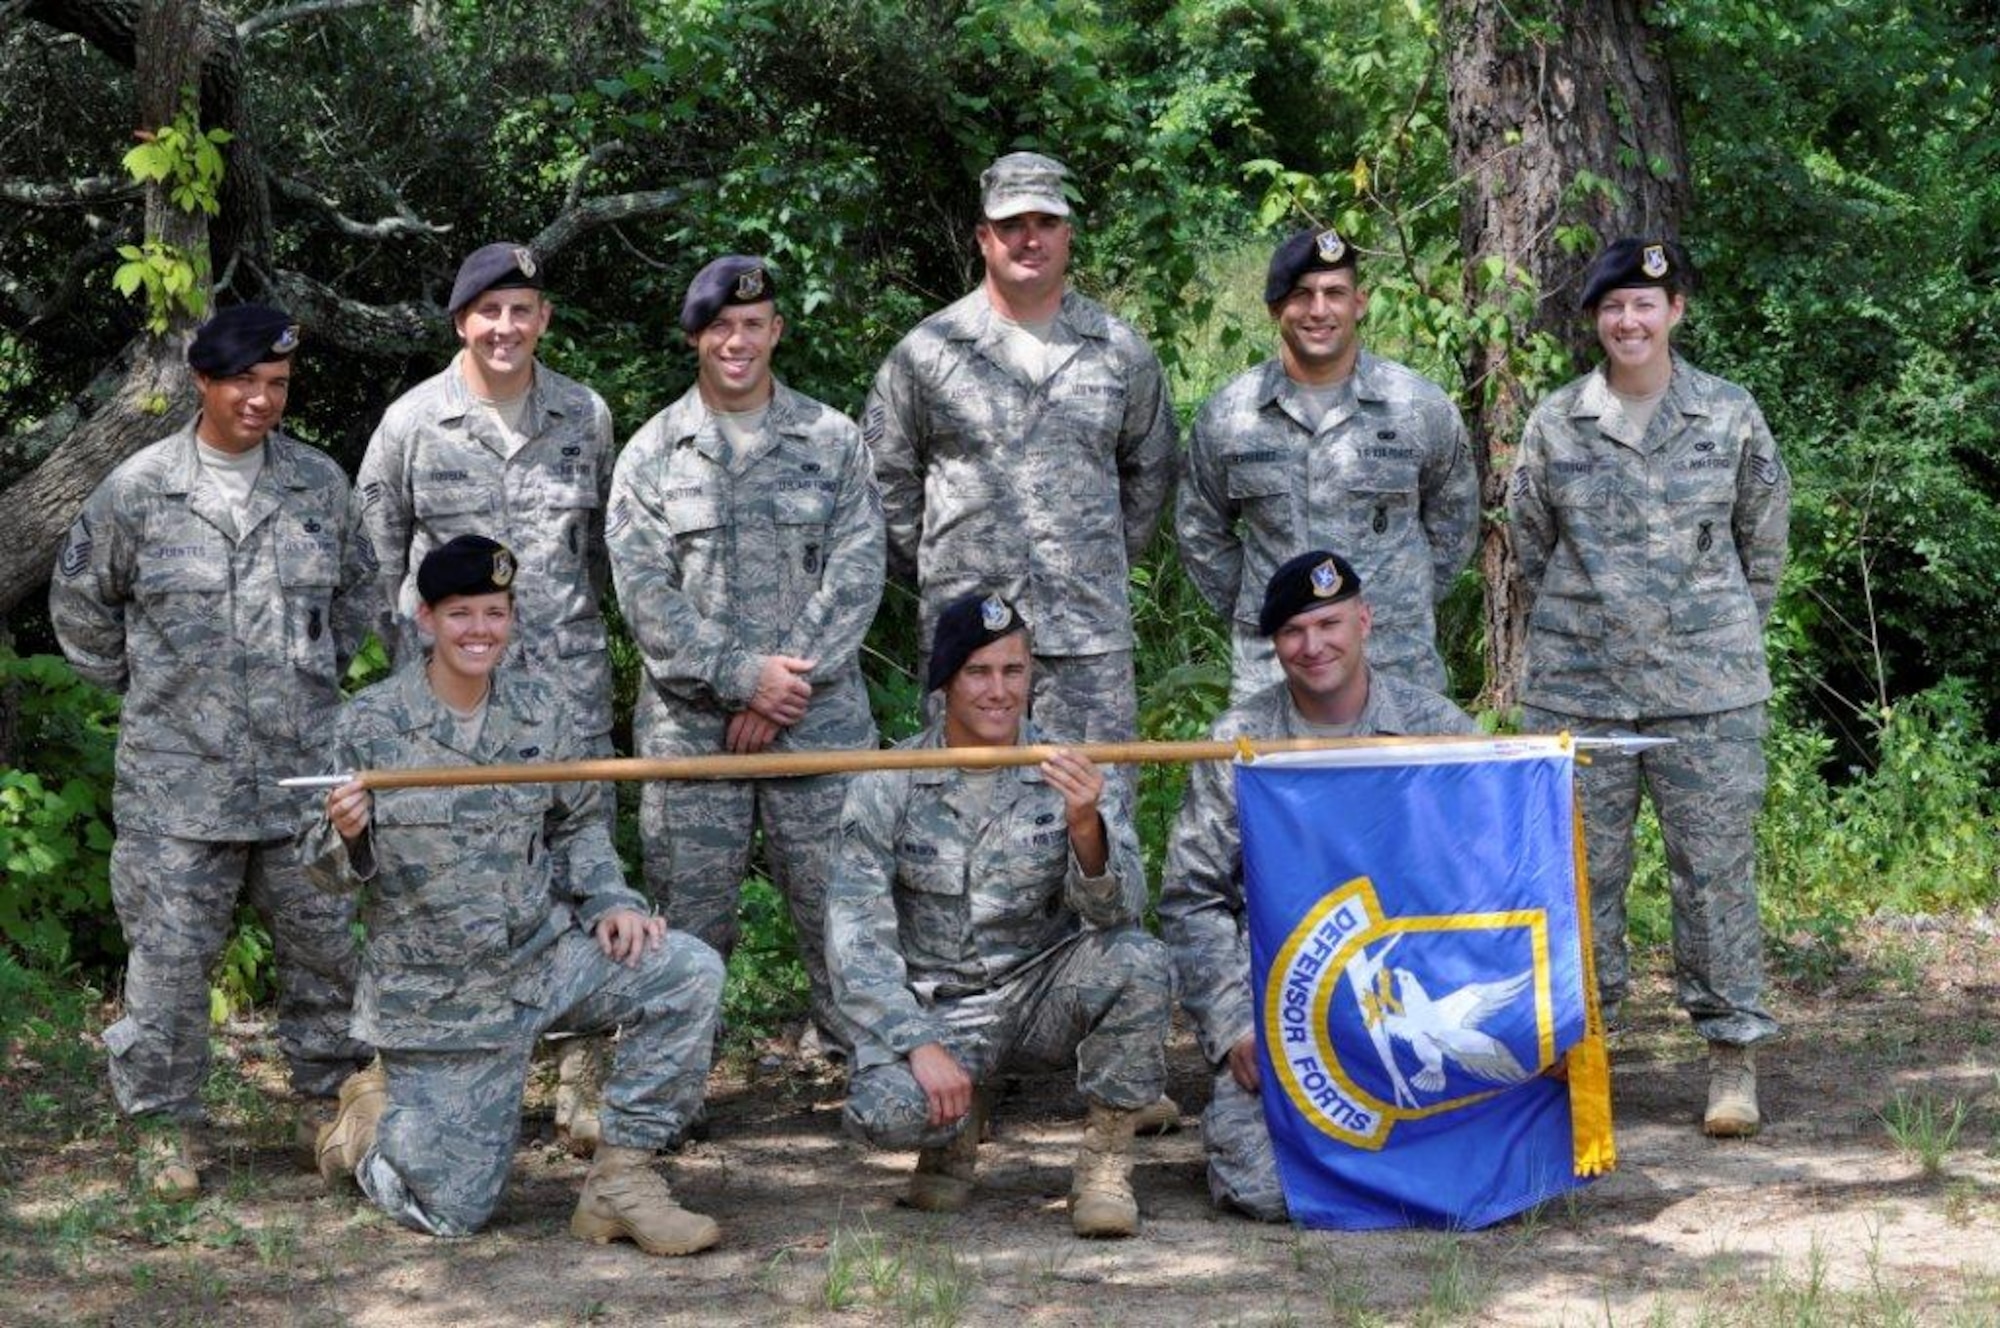 81st Training Wing Security Forces members completed their 148-mile leg of the Air Force Security Forces 9/11 Ruck March to Remember July 24.  Front row from left, Senior Airman Chelsie Mccall, Airman 1st Class Anthony Wilson and Staff Sgt. Nick Tessmer.  Back row from left, Master Sgt. Daniel Fuentes Sr., Senior Airman Brian Fossum, Staff Sgt. Austin Sutton, Master Sgt. Michael Asdel, Senior Airman Christopher Hernandez and Staff Sgt. Shannon Tessmer.  (U.S. Air Force photo by Major Matthew Pignataro)
  
